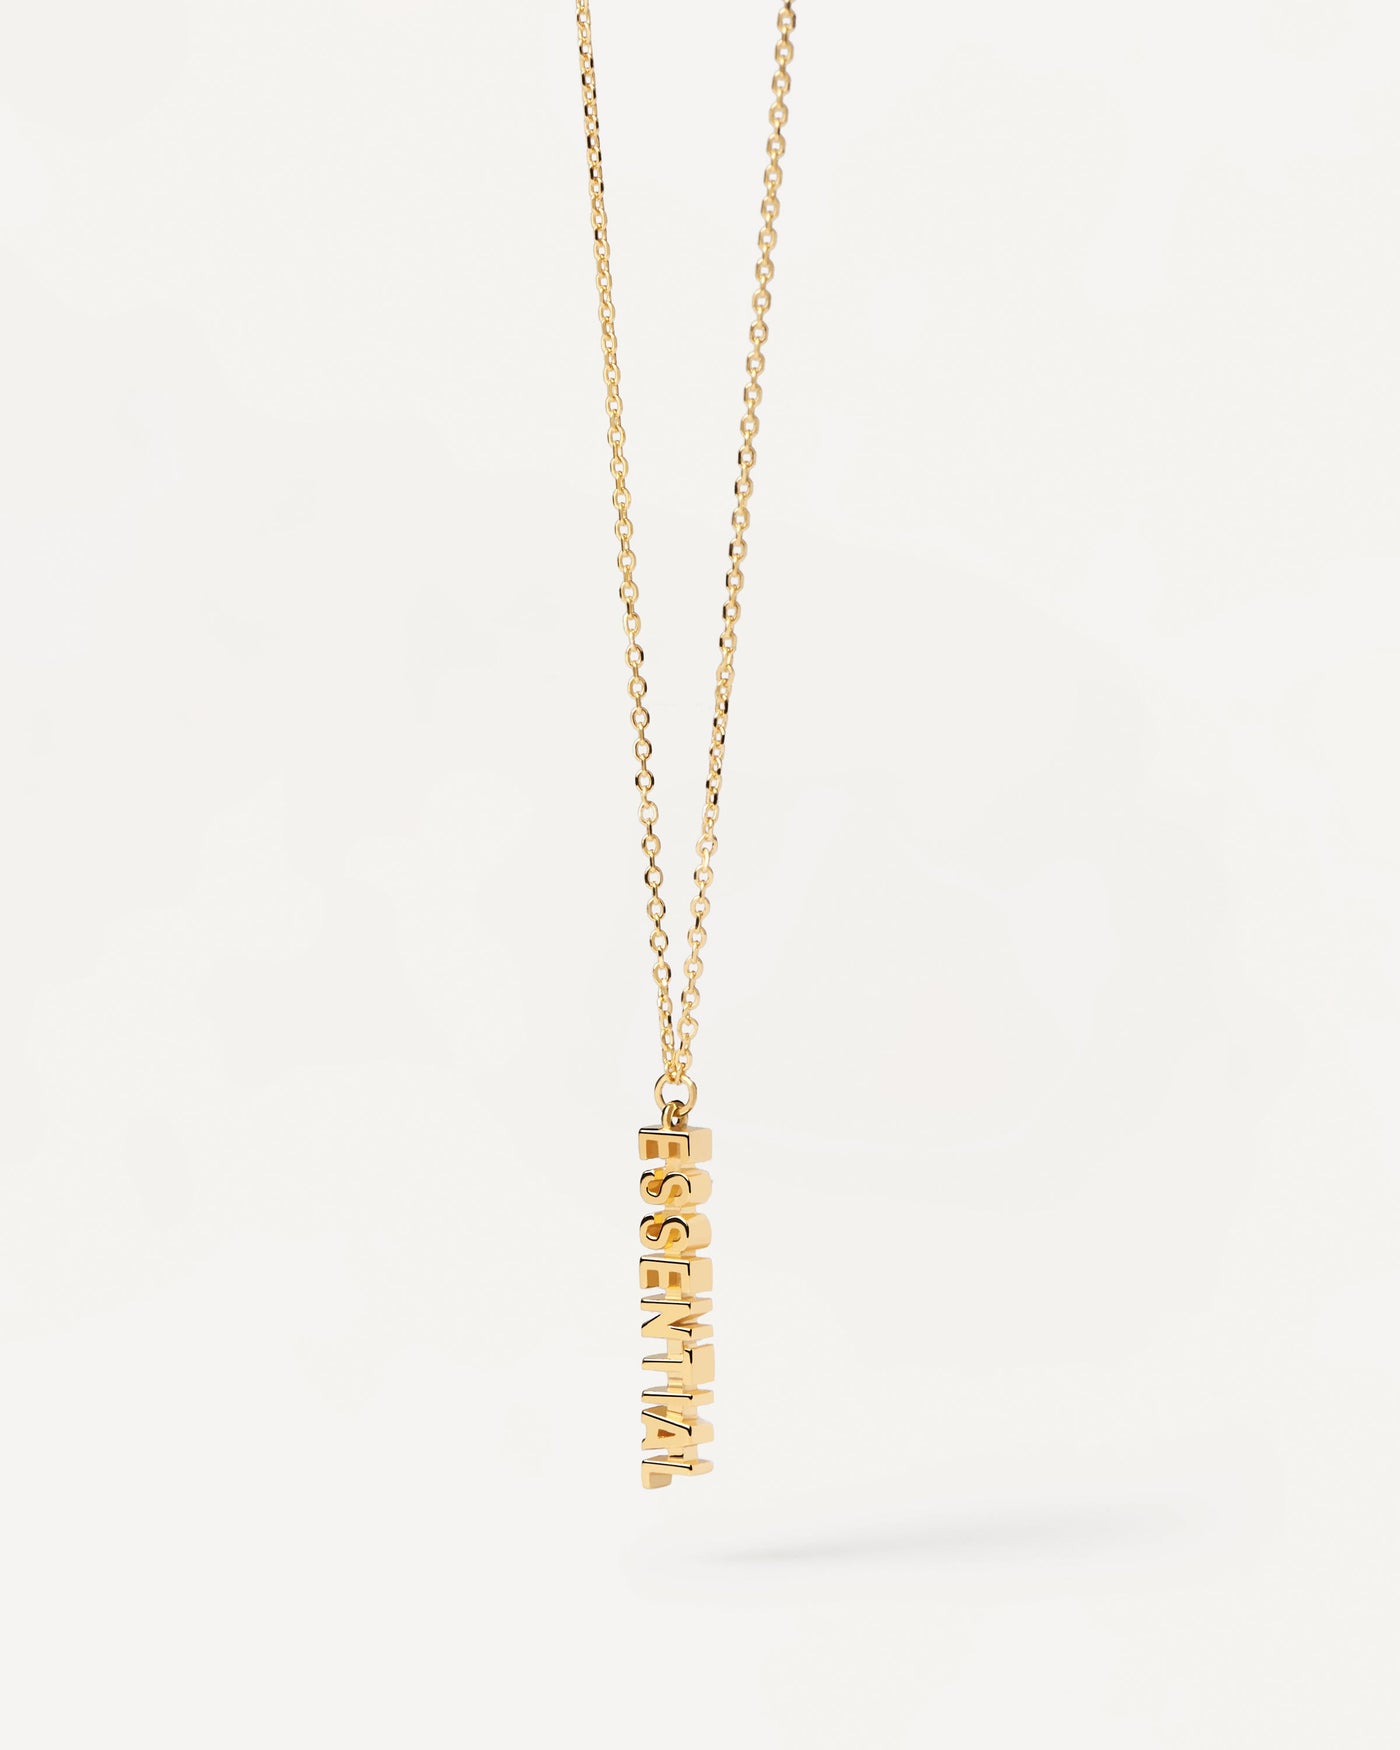 2023 Selection | Essential Necklace. Gold-plated silver necklace with a word pendant: Essential. Get the latest arrival from PDPAOLA. Place your order safely and get this Best Seller. Free Shipping.